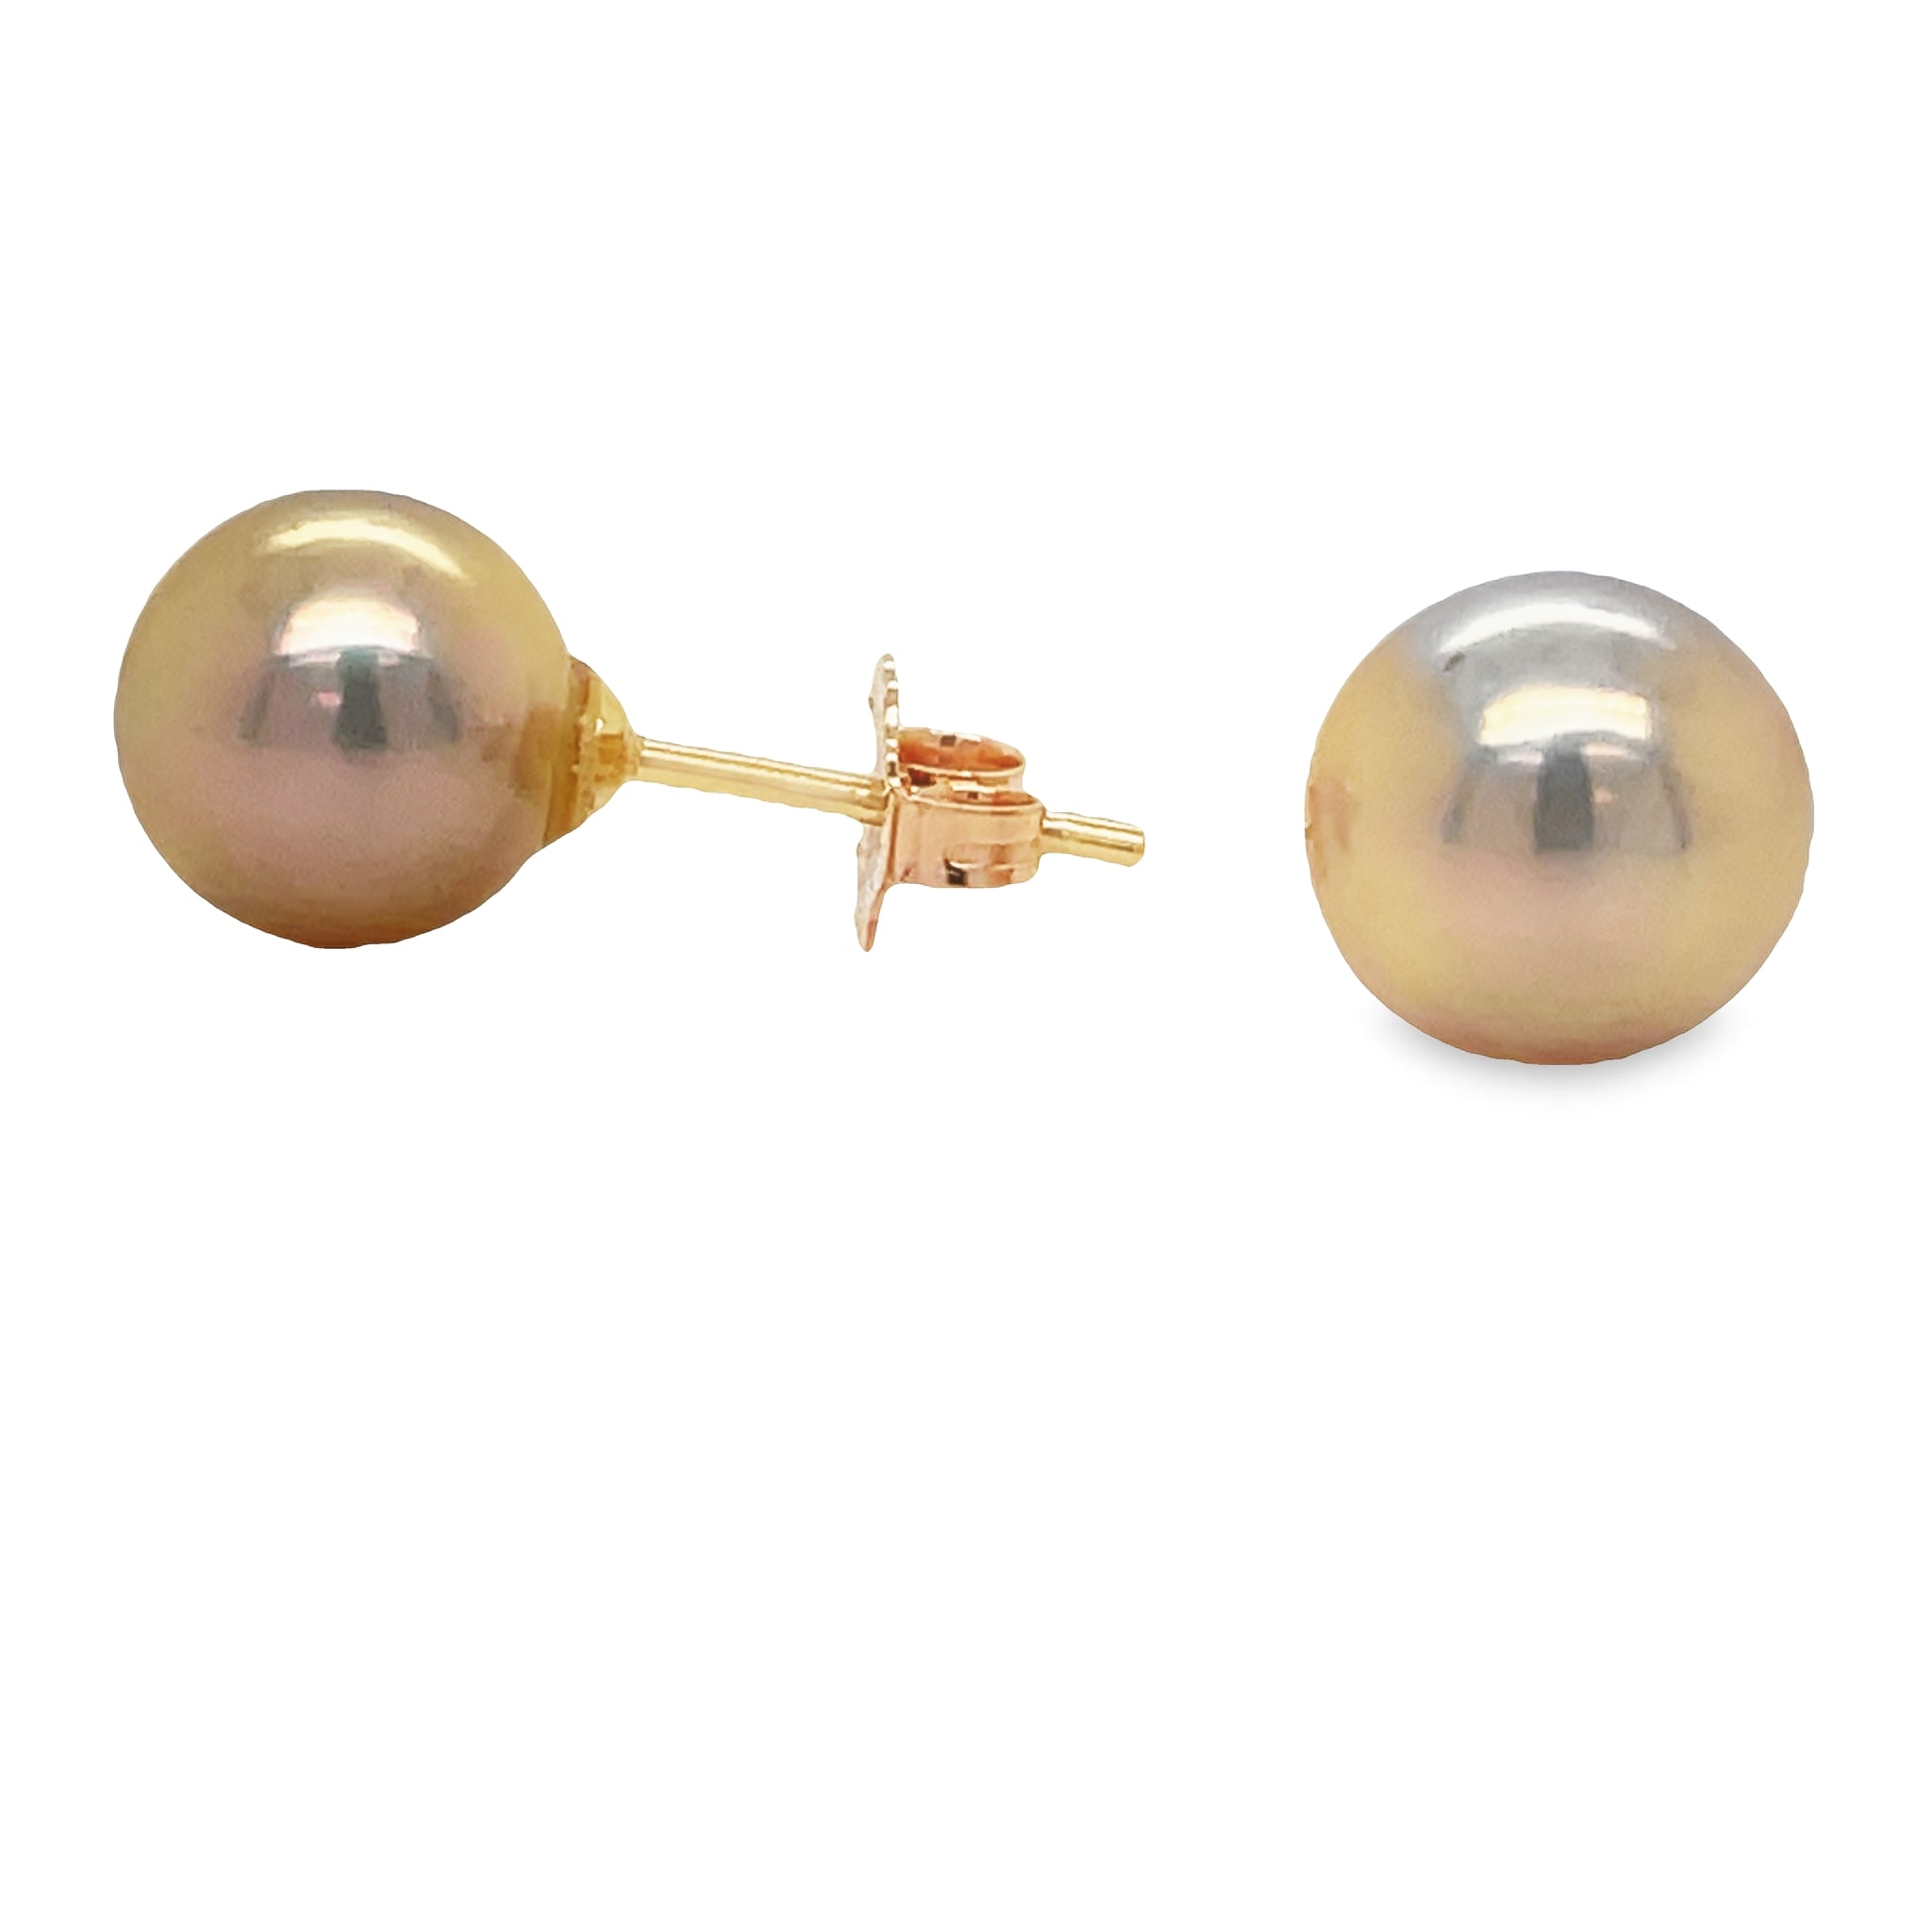 Complete your look with these stunning Golden Cultured Pearl Stud Earrings! Made with 14k rose gold, these earrings feature 9.00 mm golden cultured pearls and secure friction backs for worry-free wear. Bring a touch of elegance and sophistication to any outfit with these timeless earrings.